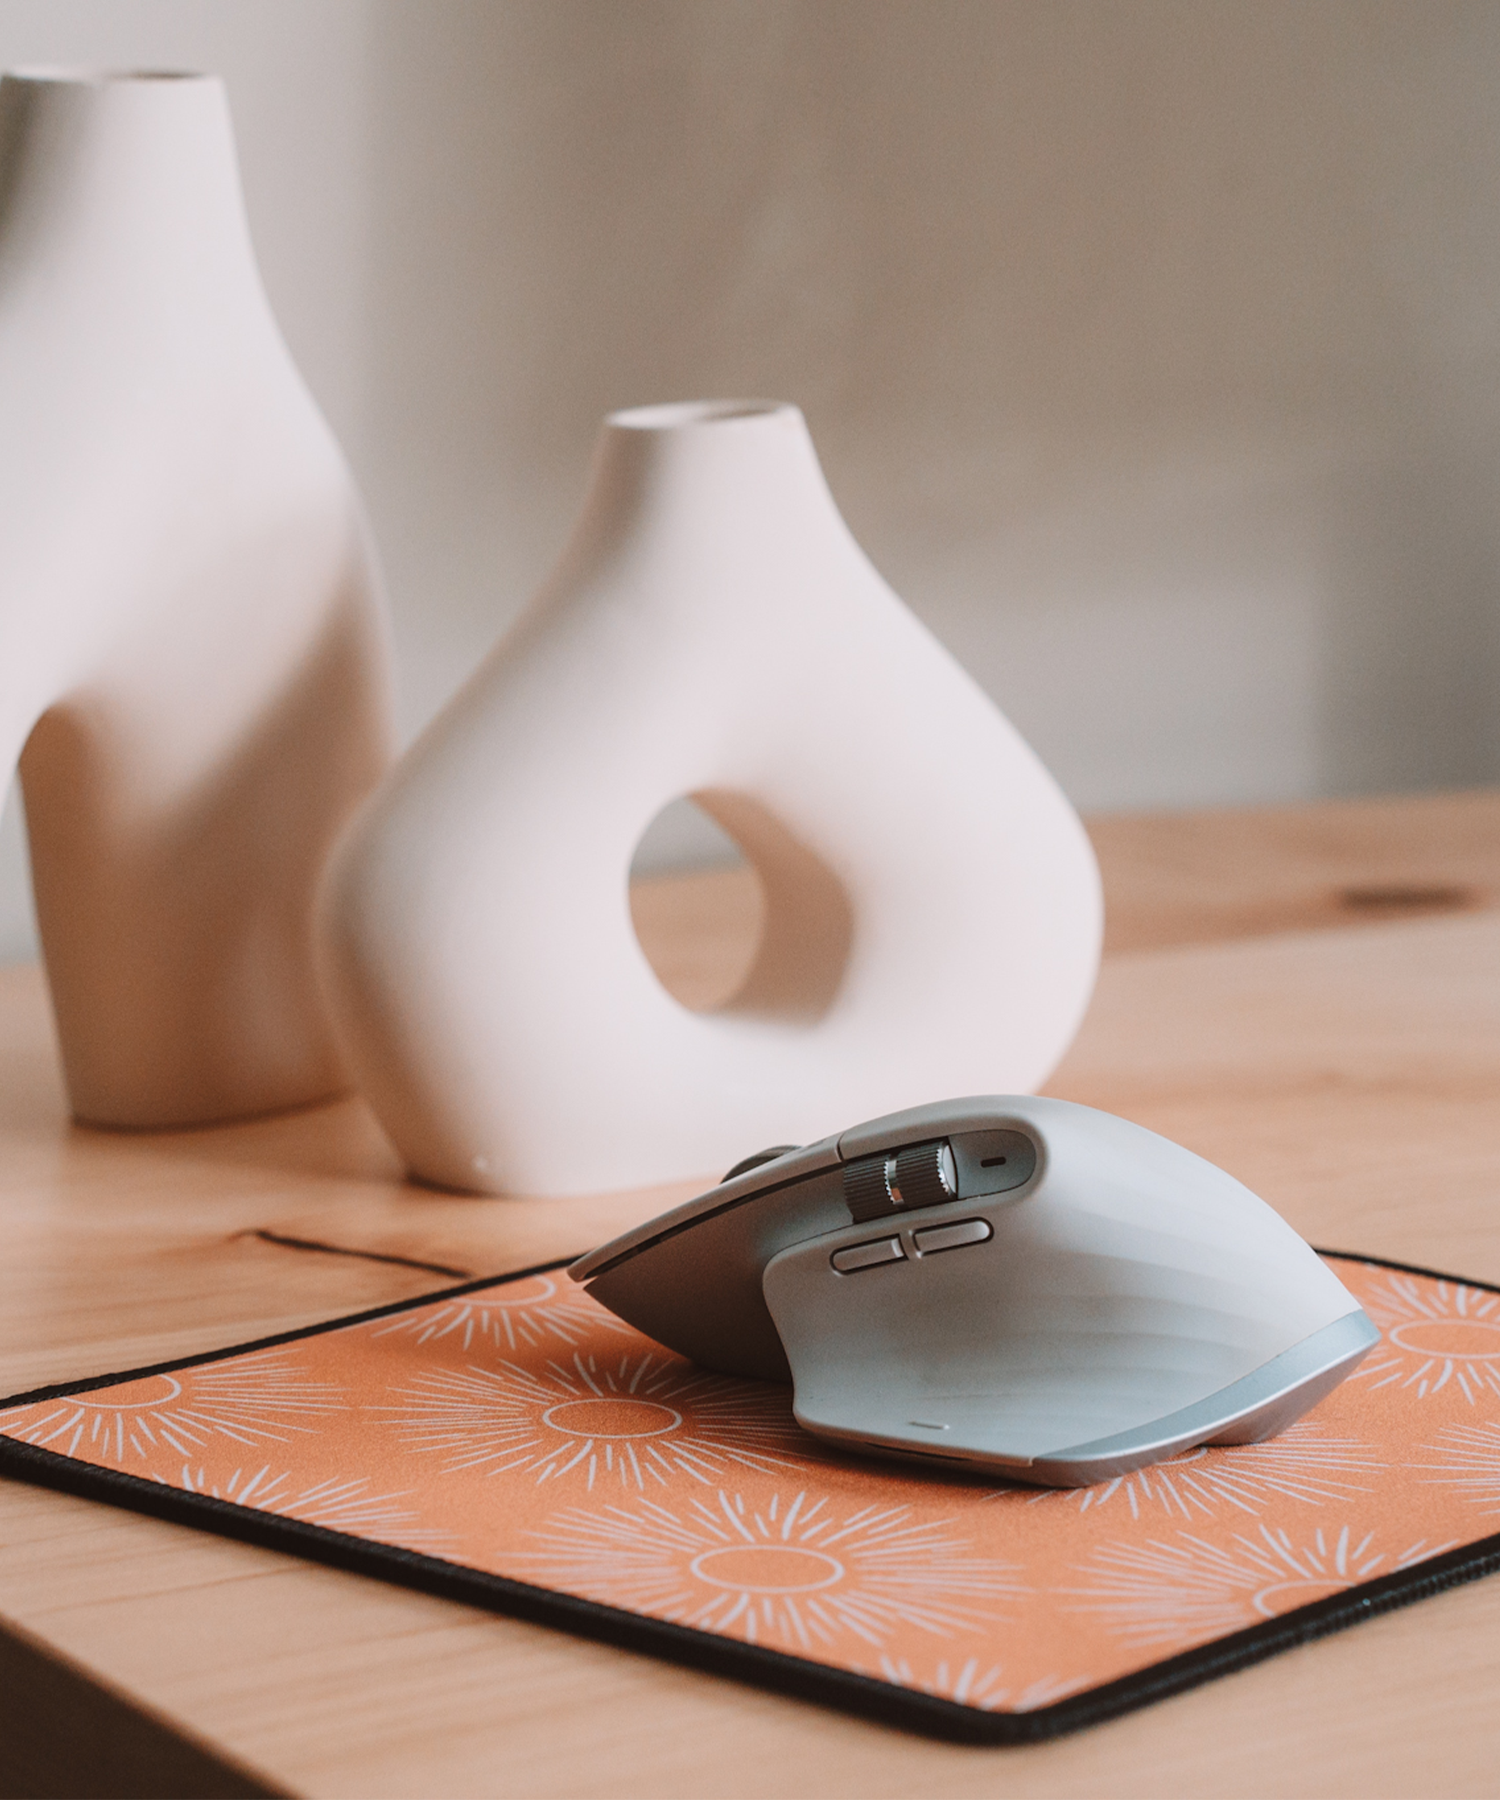 A mouse is sitting on top of the Soleil mousepad with two asymmetrical vases in the background